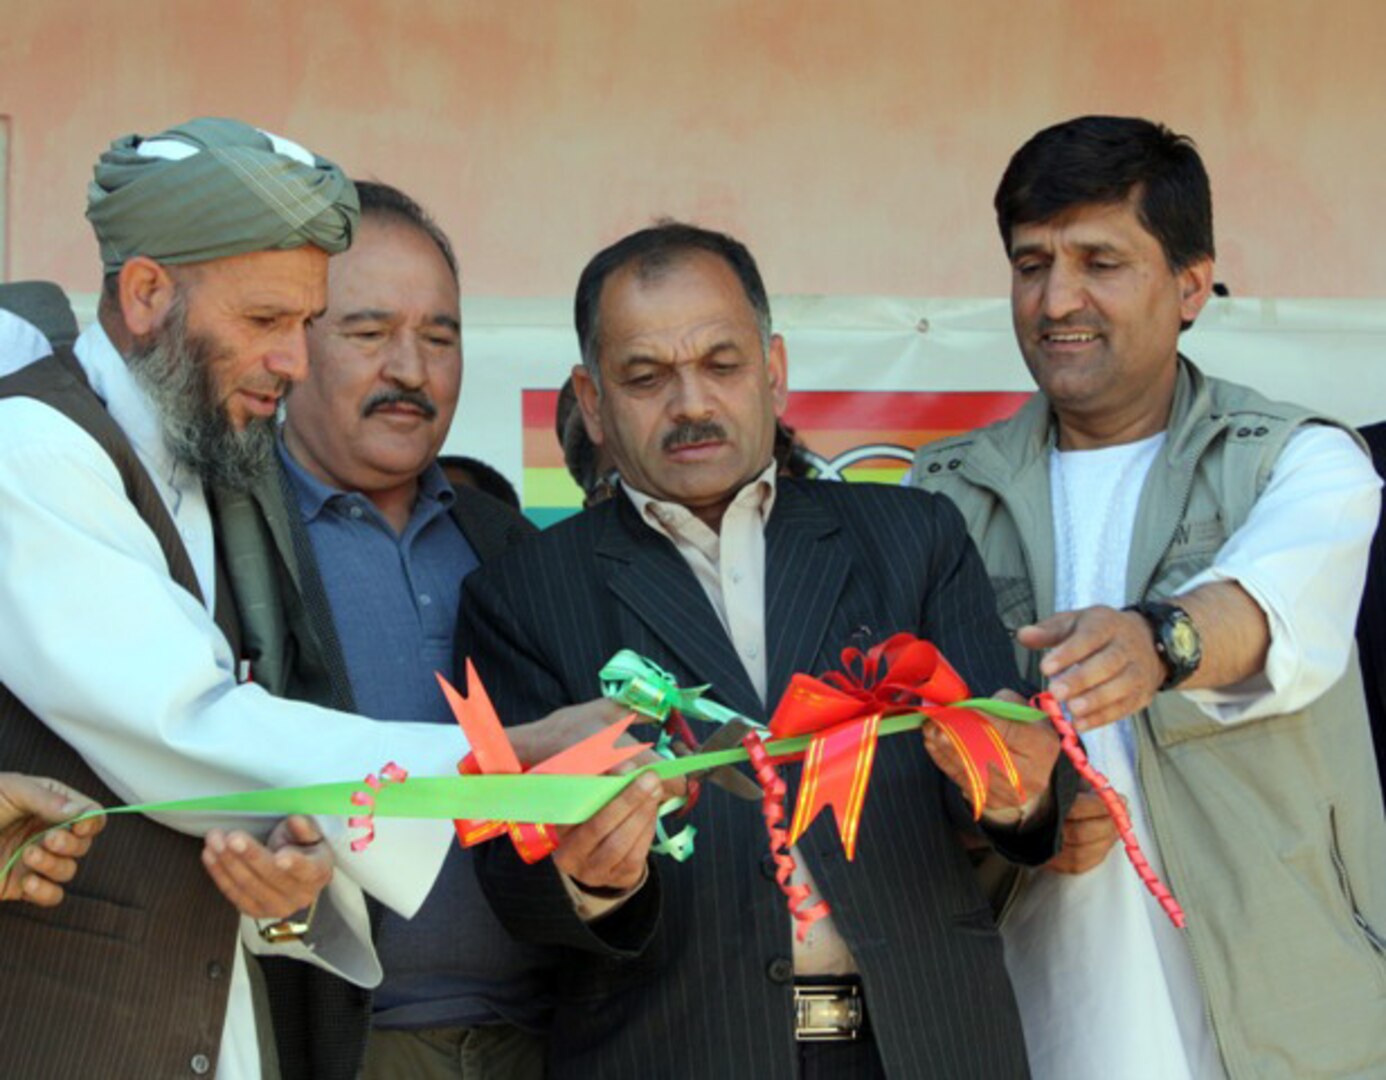 Haji Abdul Robate Qahir (far left), the Director of the Baston Seed Company,
cuts the ribbon across the entrance of his new soybean processing facility
in Bagram, April 2, 2011. Mohammad Sharif Sharif (back left), an engineer
with Soy Nutrition Services Afghanistan, Abdul Kabir Farzam (center), the
Parwan Director of Agriculture, Irrigation and Livestock, and Shamir Amiri
(right), the Panjshir DAIL hold the ribbon for Qahir.